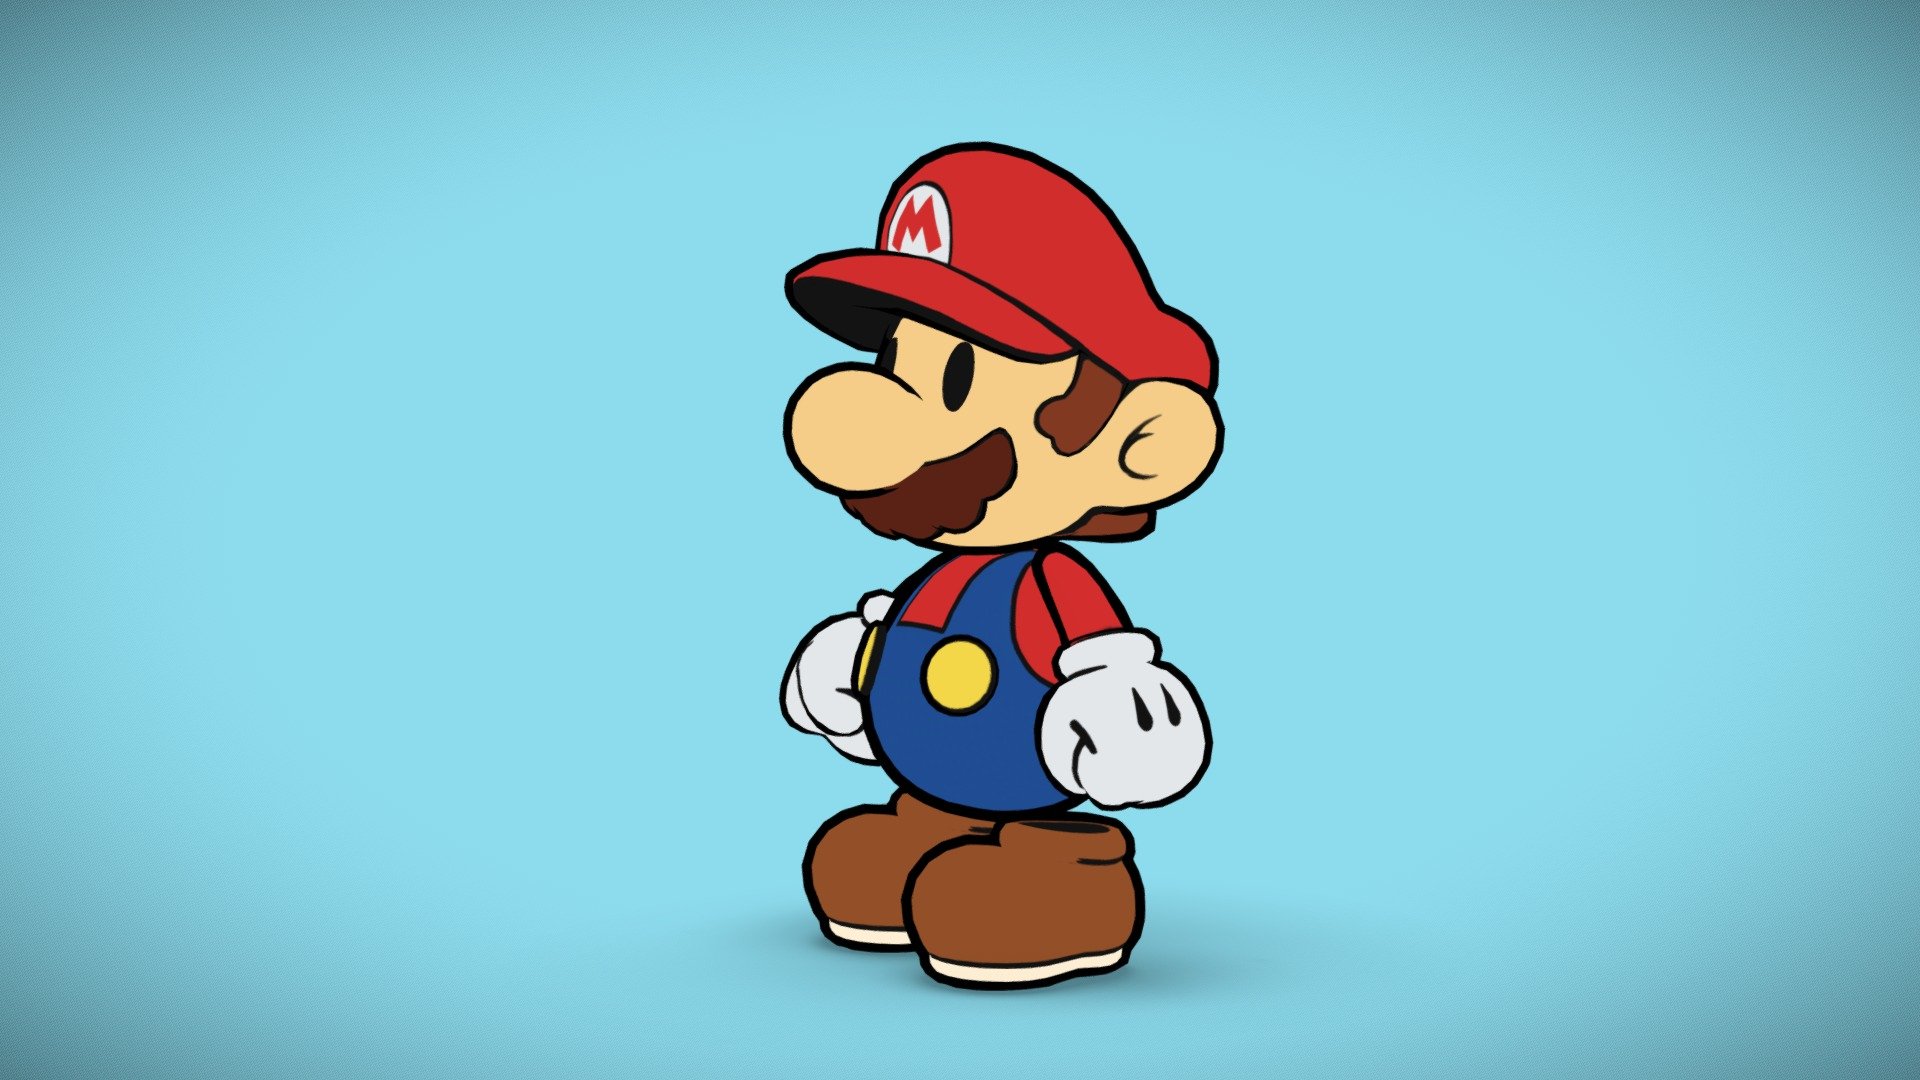 Paper Mario translated into 3D.
Made to study the creation of outline meshes; will be using these techniques for future projects! - Paper Mario - Fanart - 3D model by seanhicksart 3d model